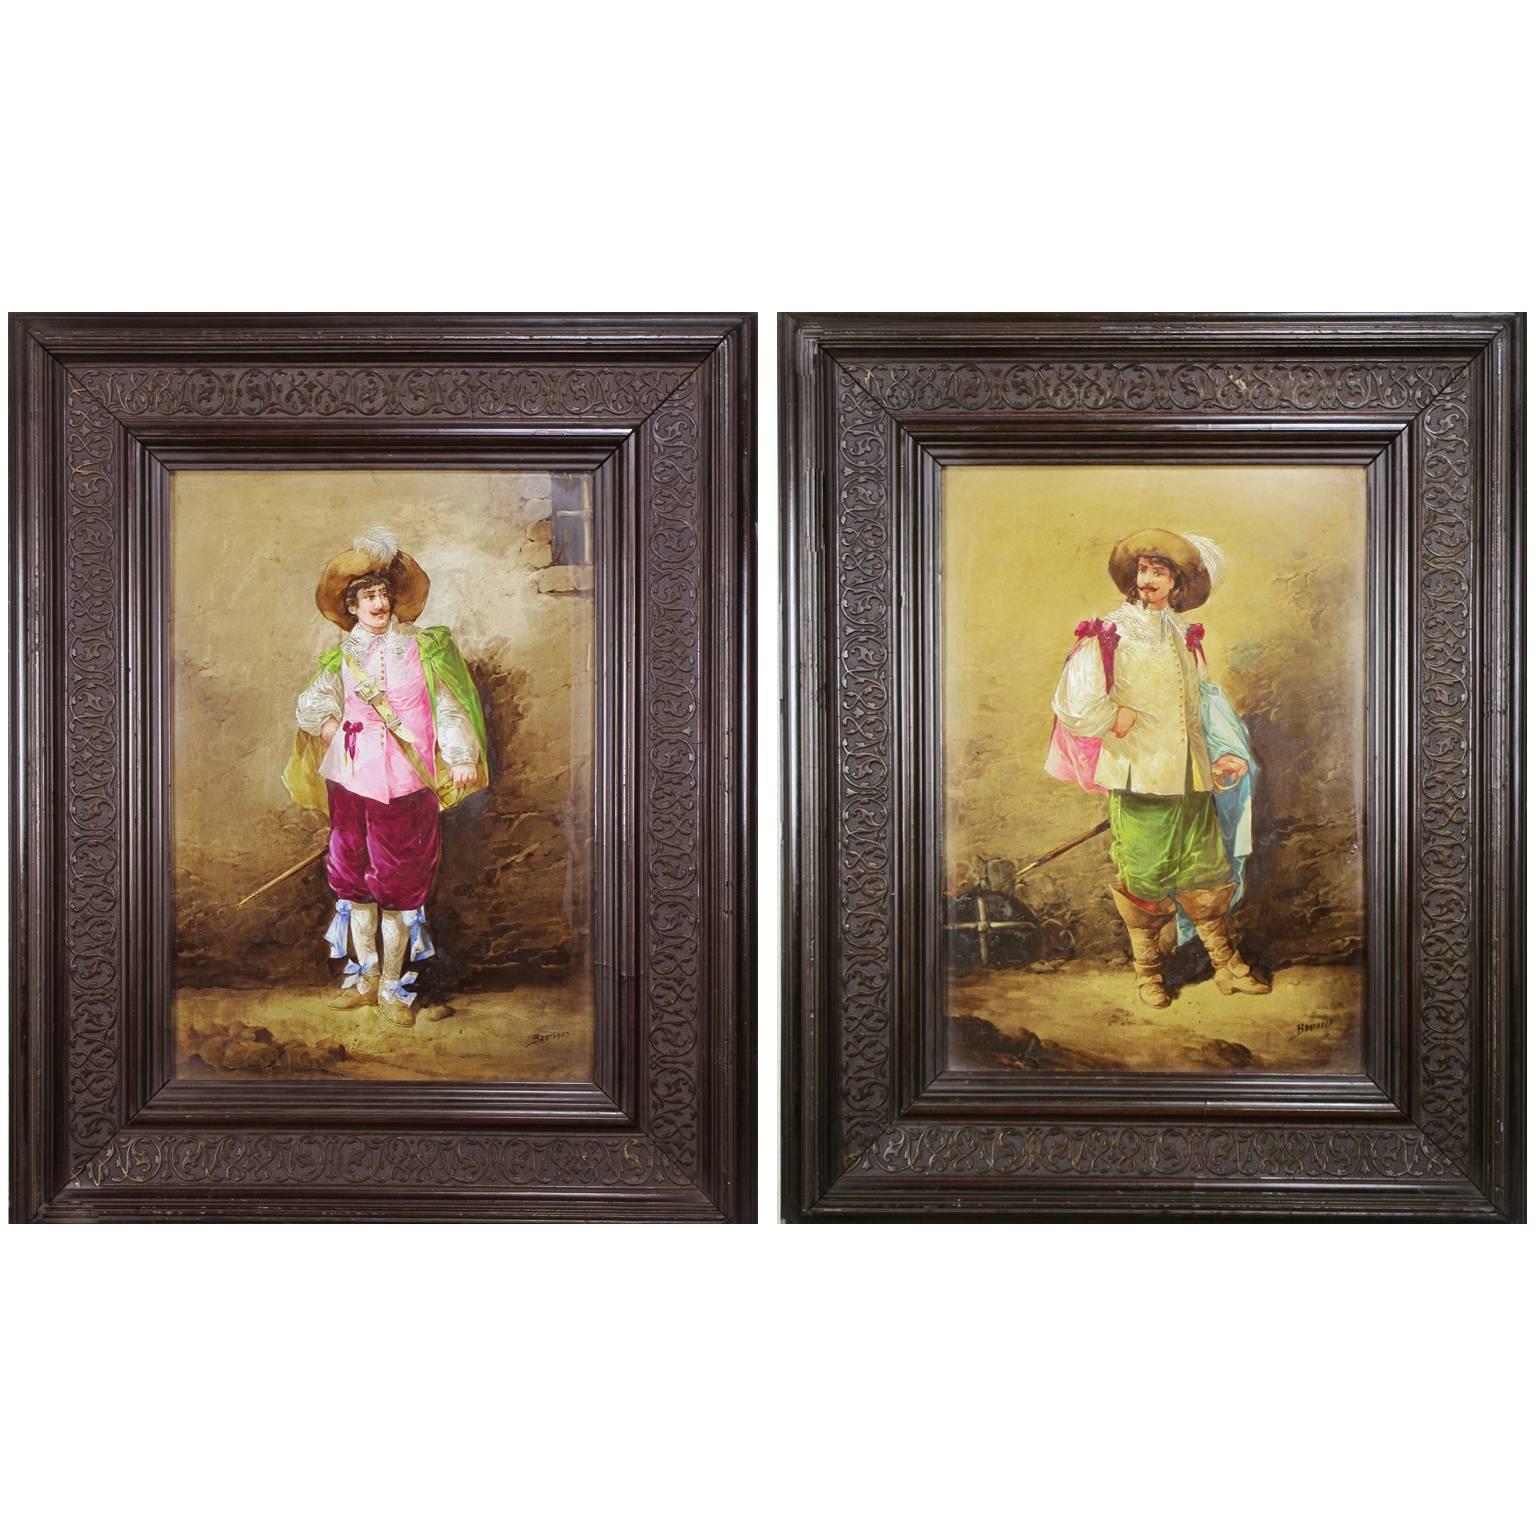 Pair of French Porcelain Plaques of Musketeers by Leon Berthaud For Sale